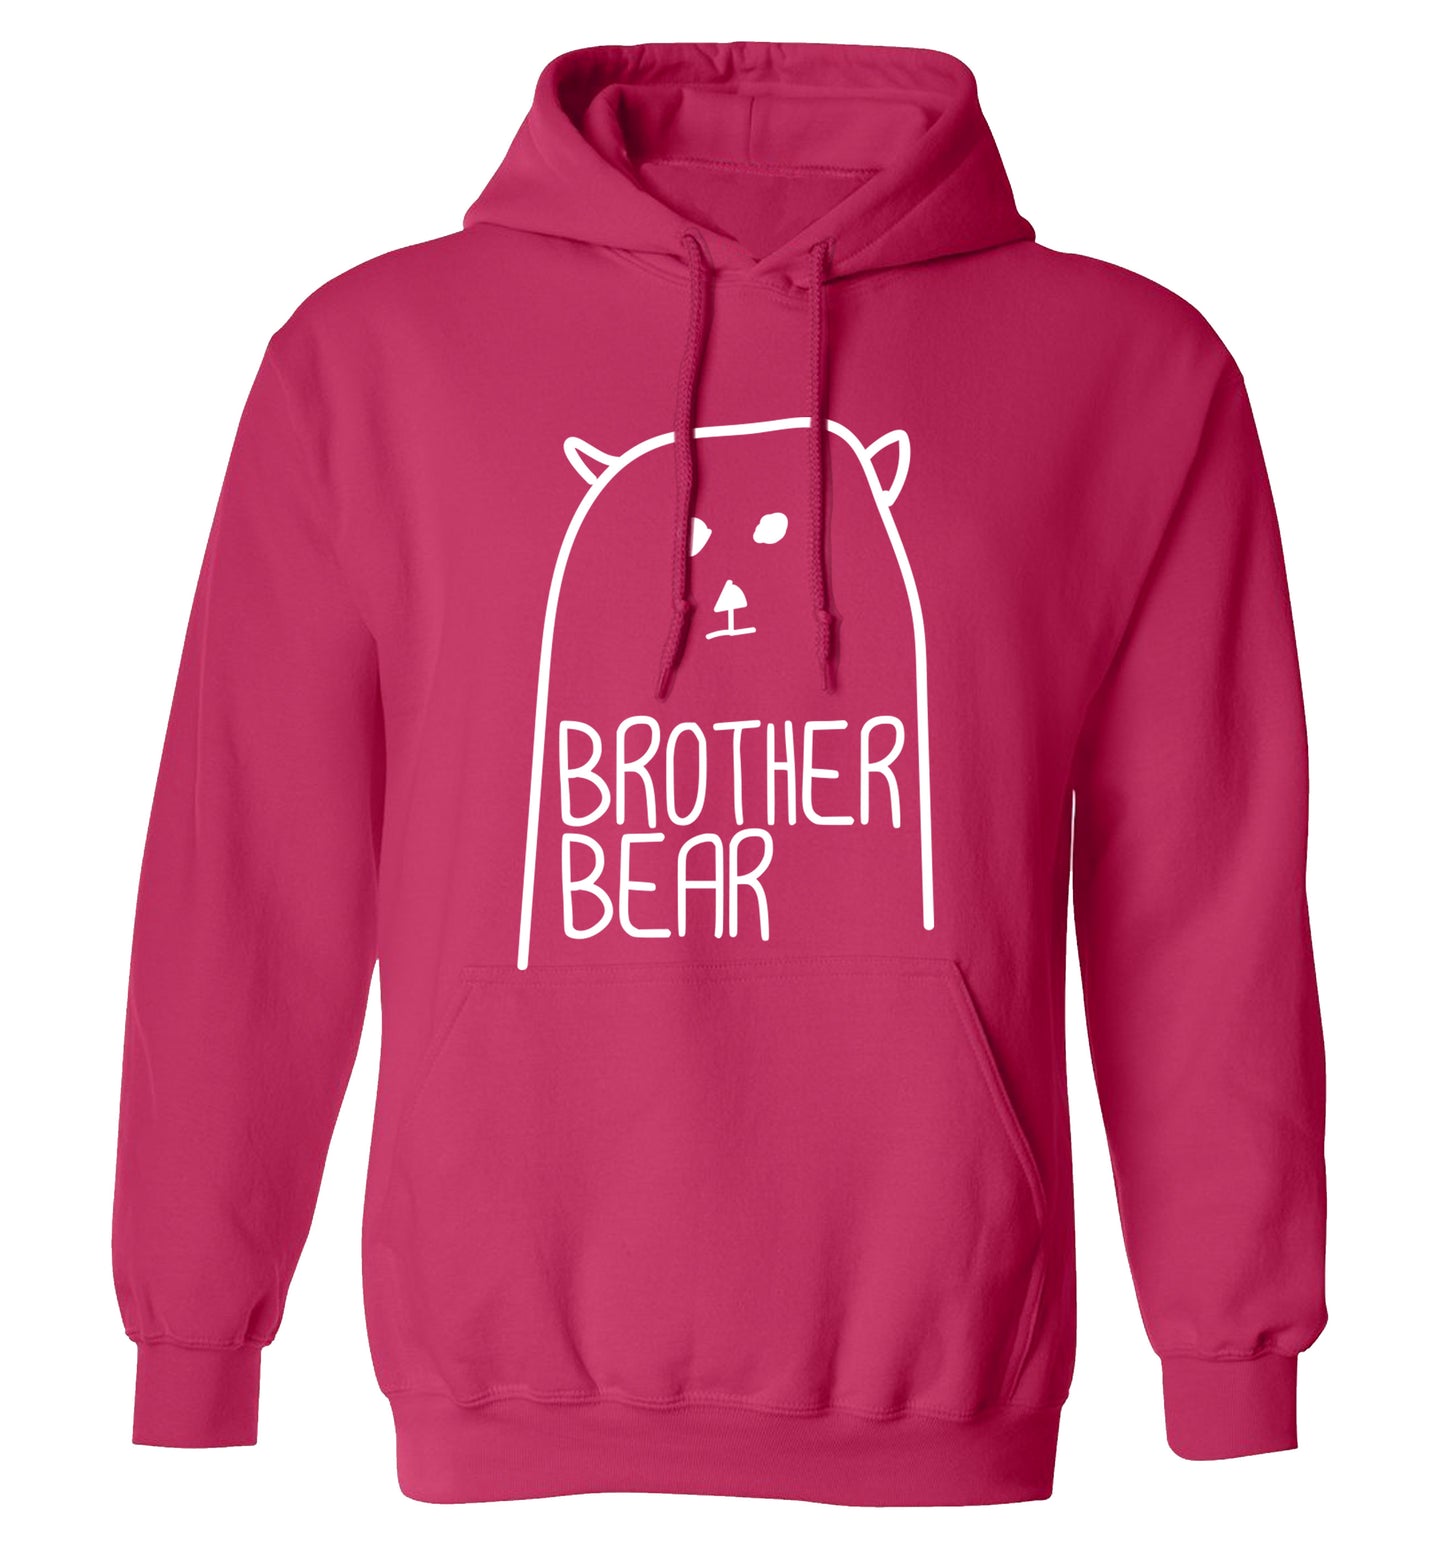 Brother bear adults unisex pink hoodie 2XL